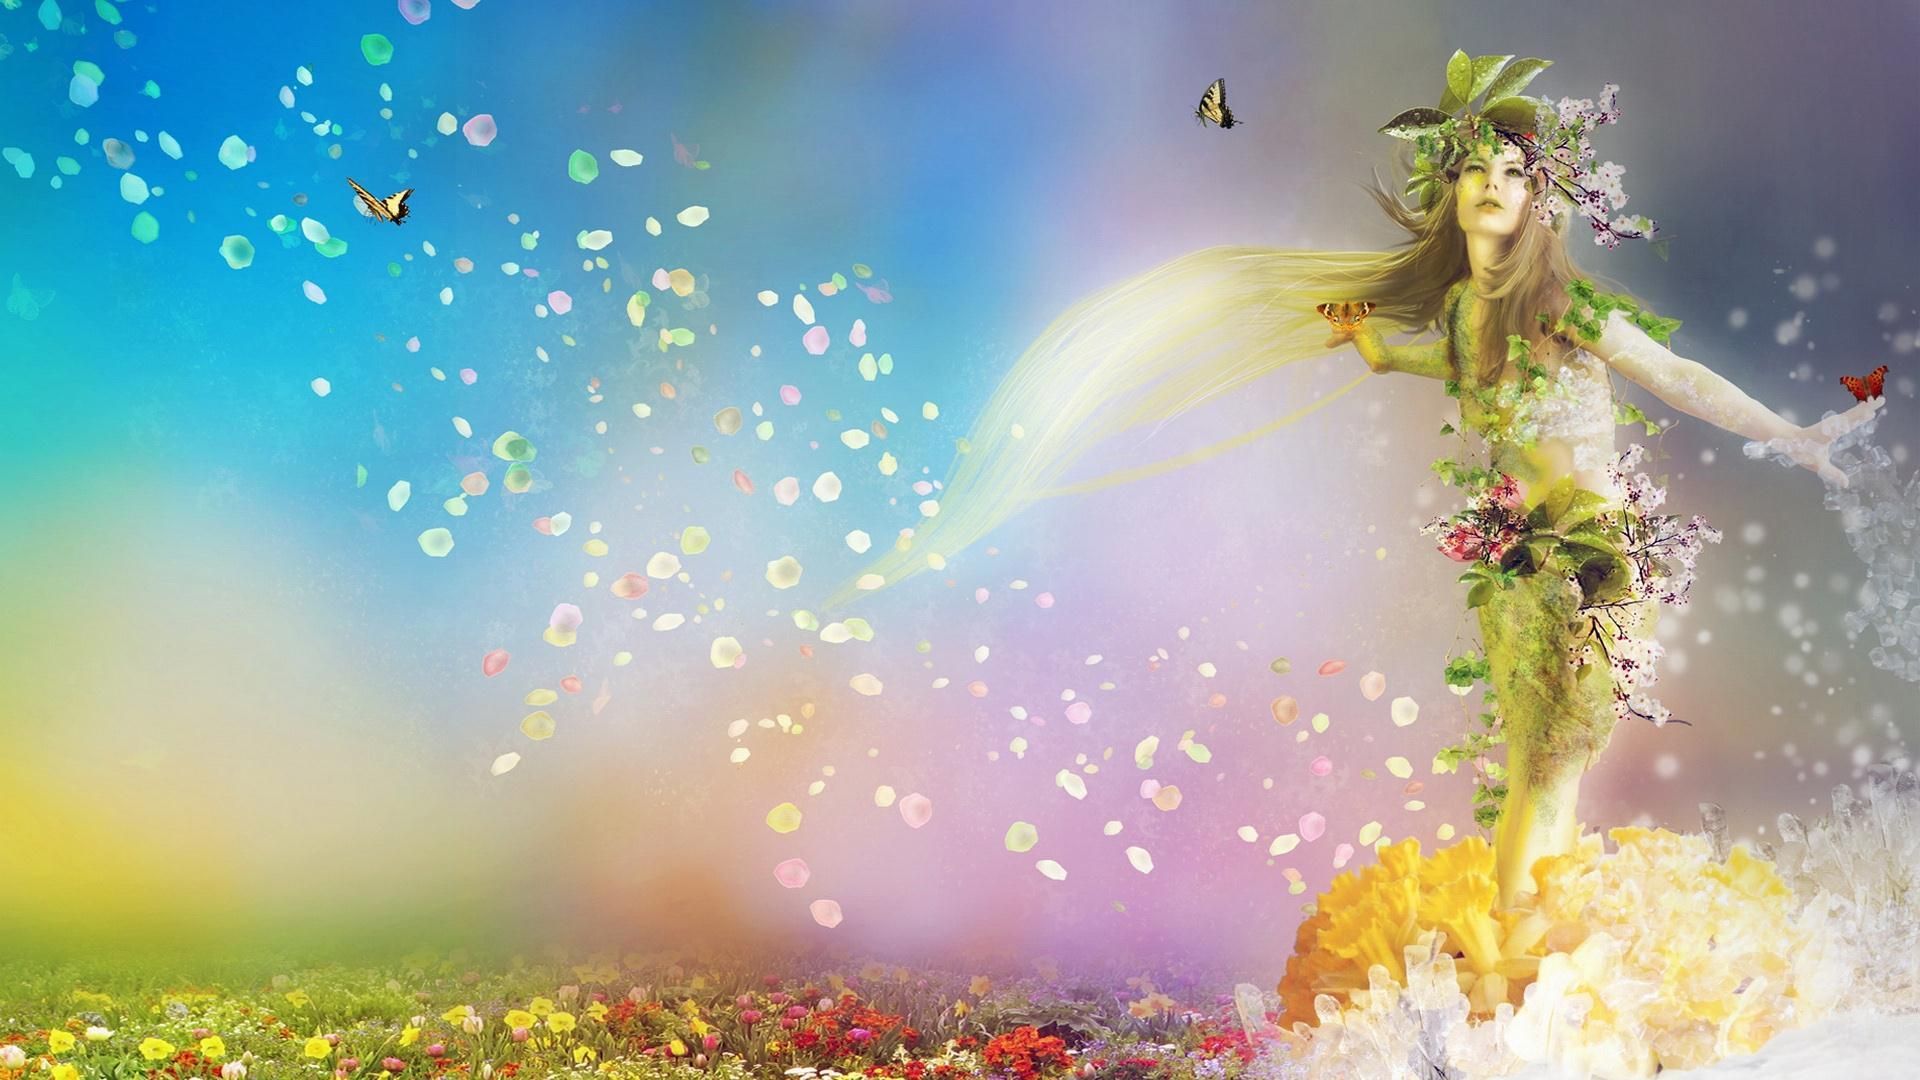 Fantasy Girl With Flowers. Fairy wallpaper, Spring desktop wallpaper, Spring wallpaper hd